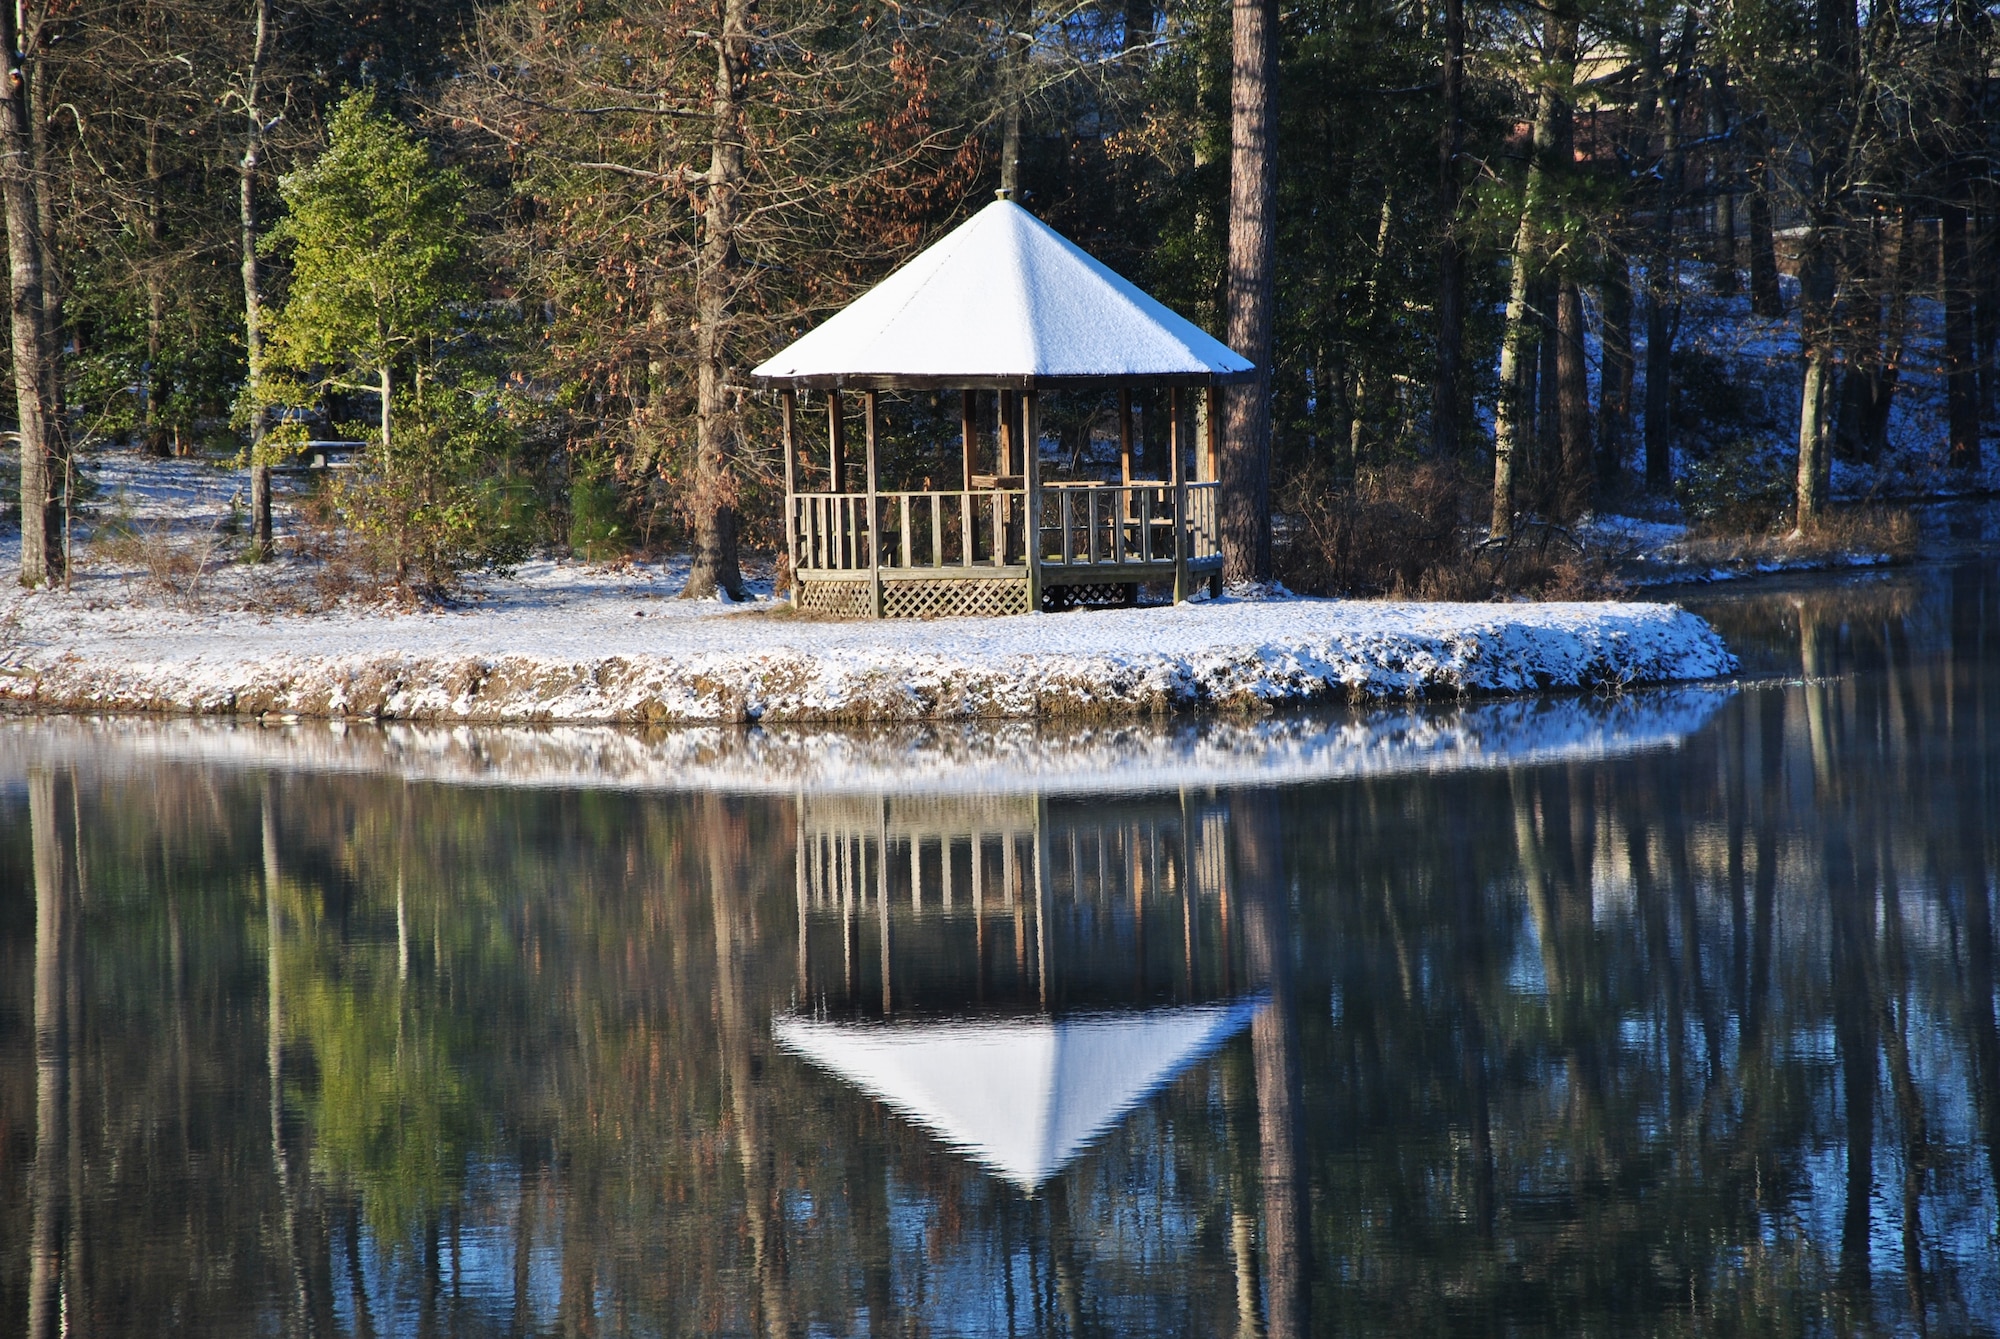 The gazebo at Duck Lake paints a picture-perfect winter scene Thursday. With temperatures rising into the 40s most of the ice and snow was gone by late afternoon.(U.S. Air Force photo by Ray Crayton)